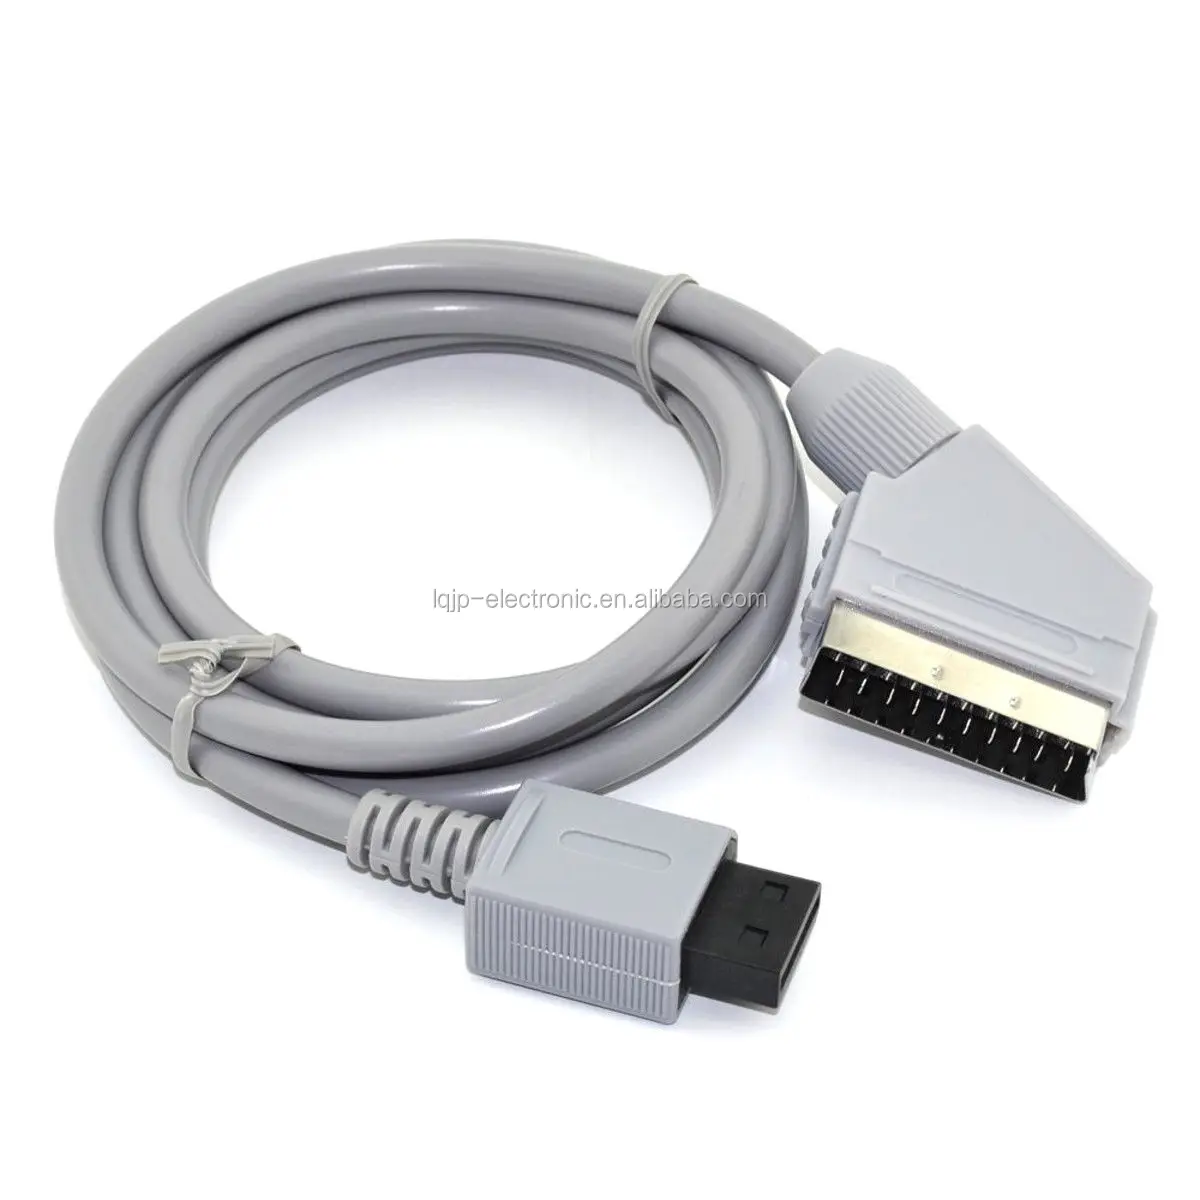 Substantial Telegraph Recreation Scart Cable Compatible With For Nintendo For Wii/wii U - Replacement Scart  Cable Av Lead - Buy For Wii Cable,Scart Cable For Wii,For Wii Scart Cable  Product on Alibaba.com